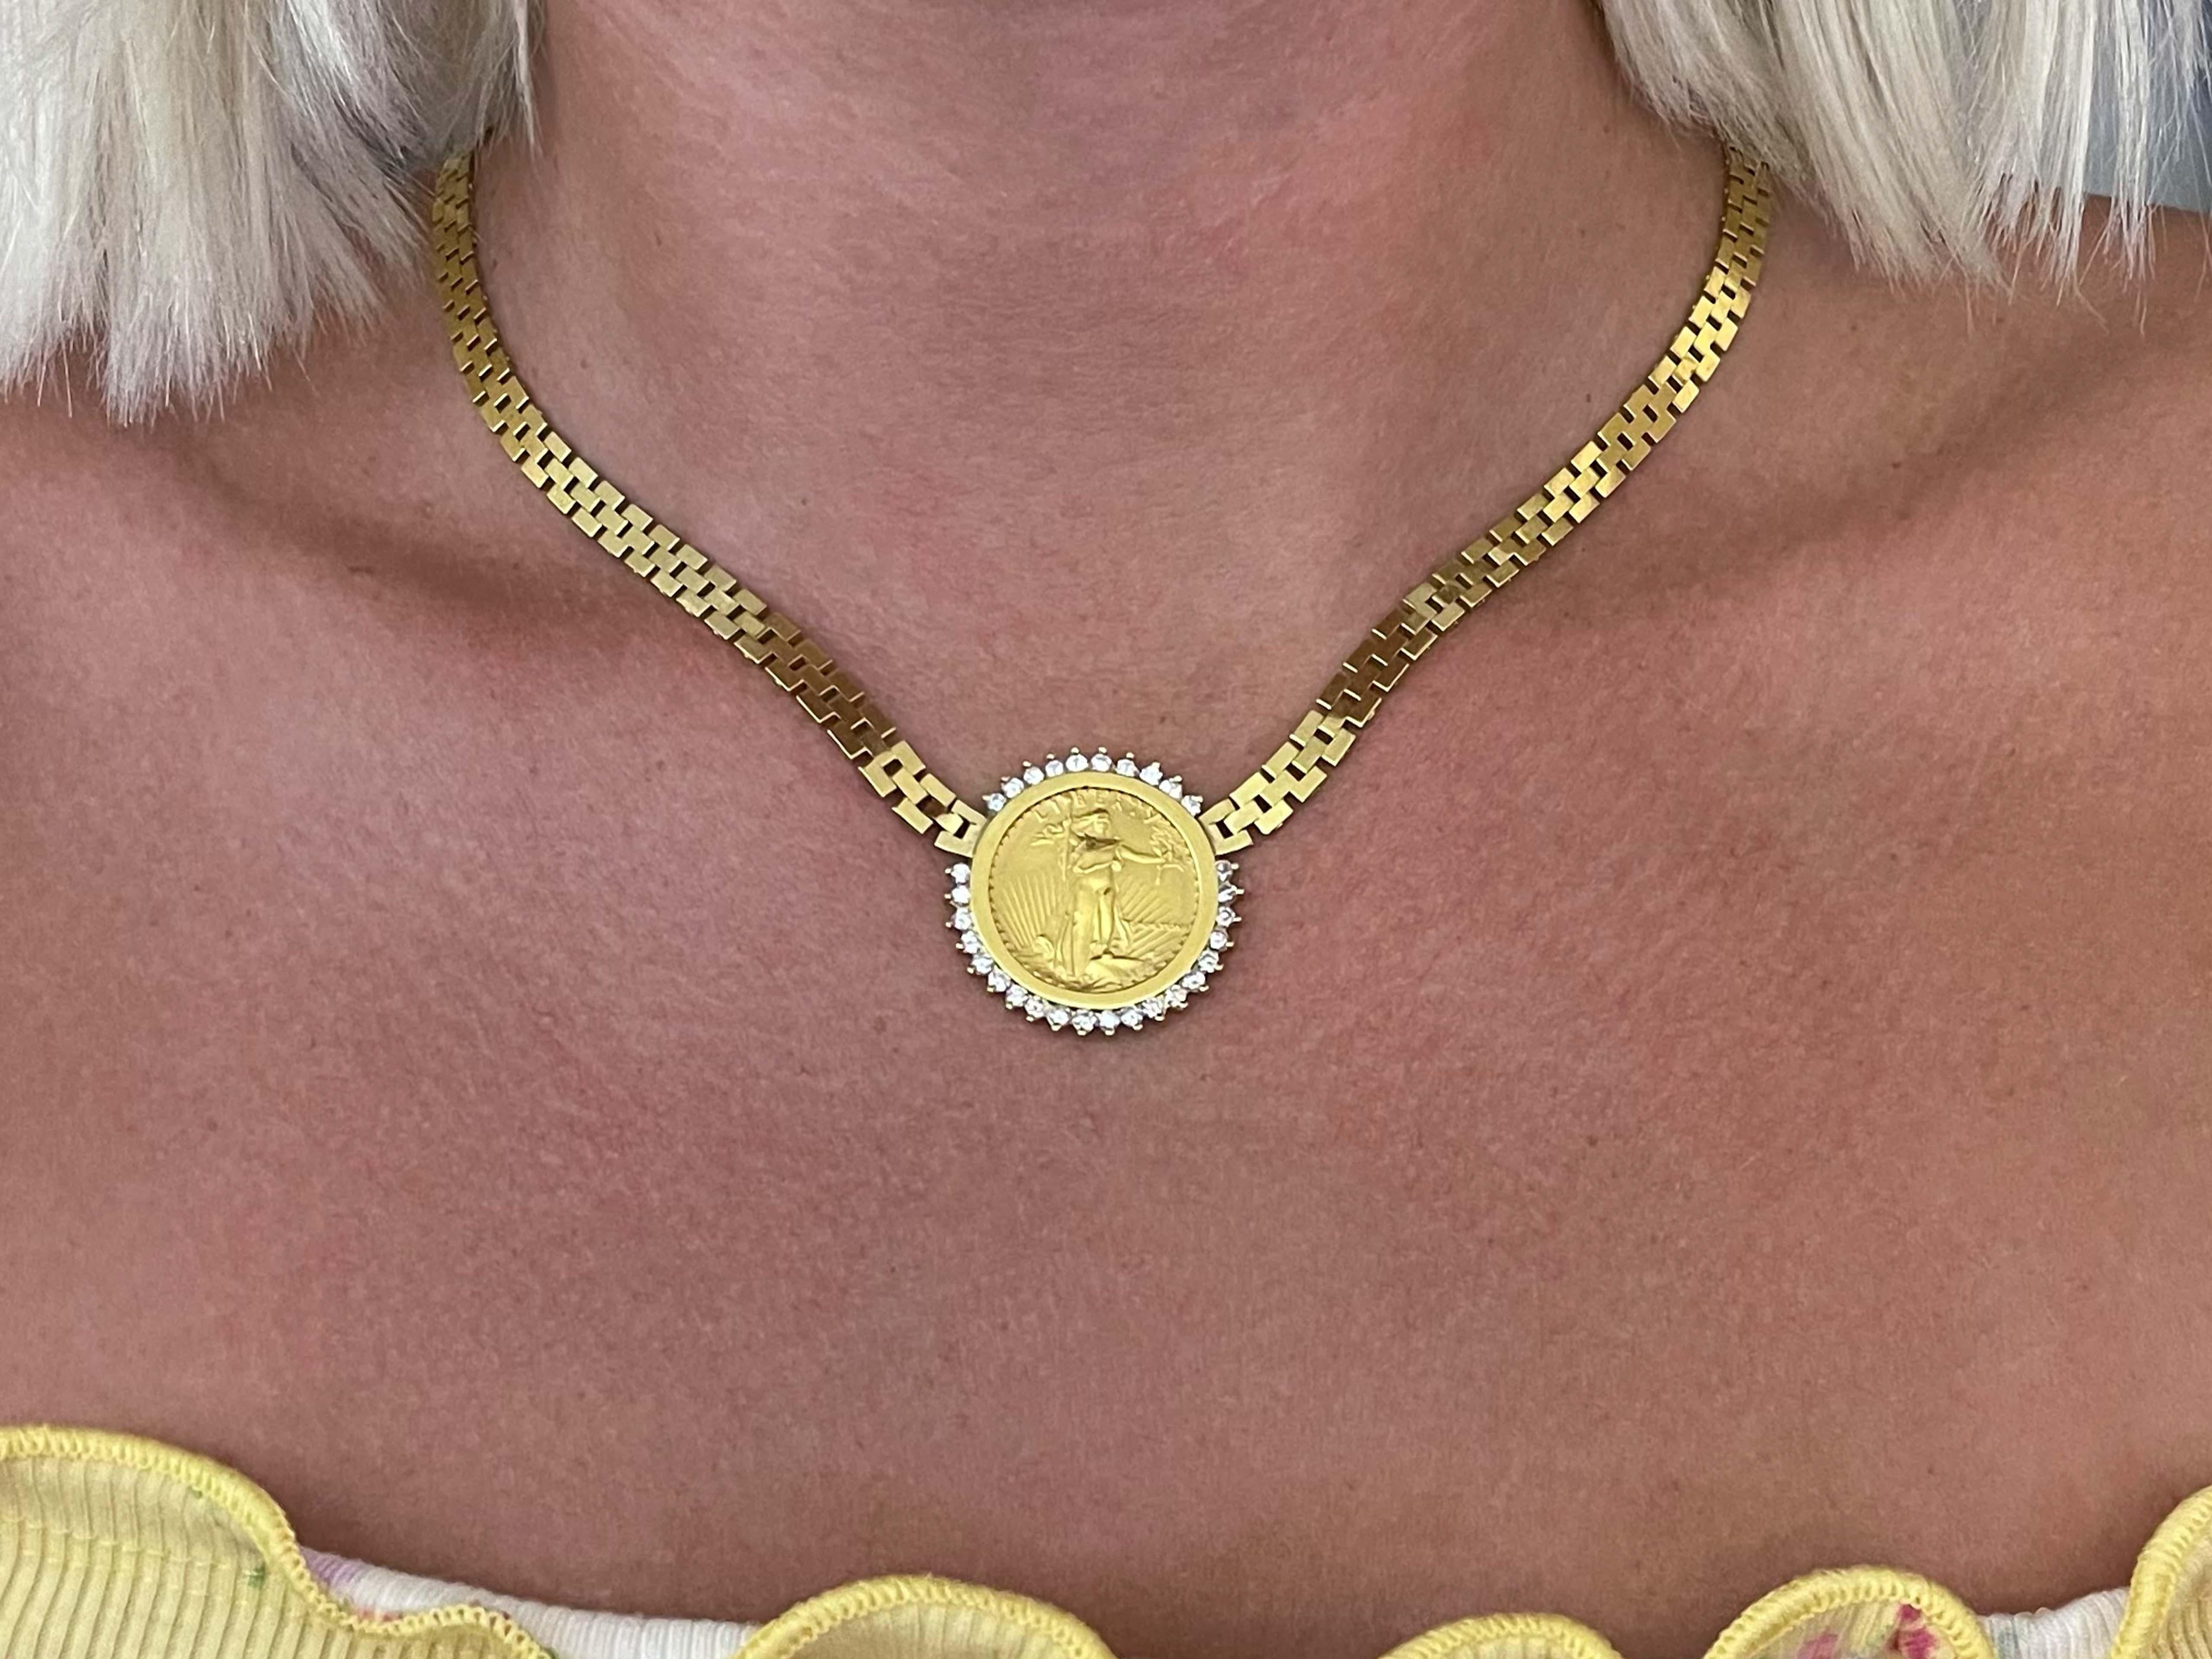 This necklace contains one $10 American Eagle gold coin with 1/4 ounce of pure gold. The coin is set in a 18K gold diamond bezel. The diamonds weigh ~1.00 carats and are G-H, VS2. The pendant is 28mm in diameter and the chain is 14